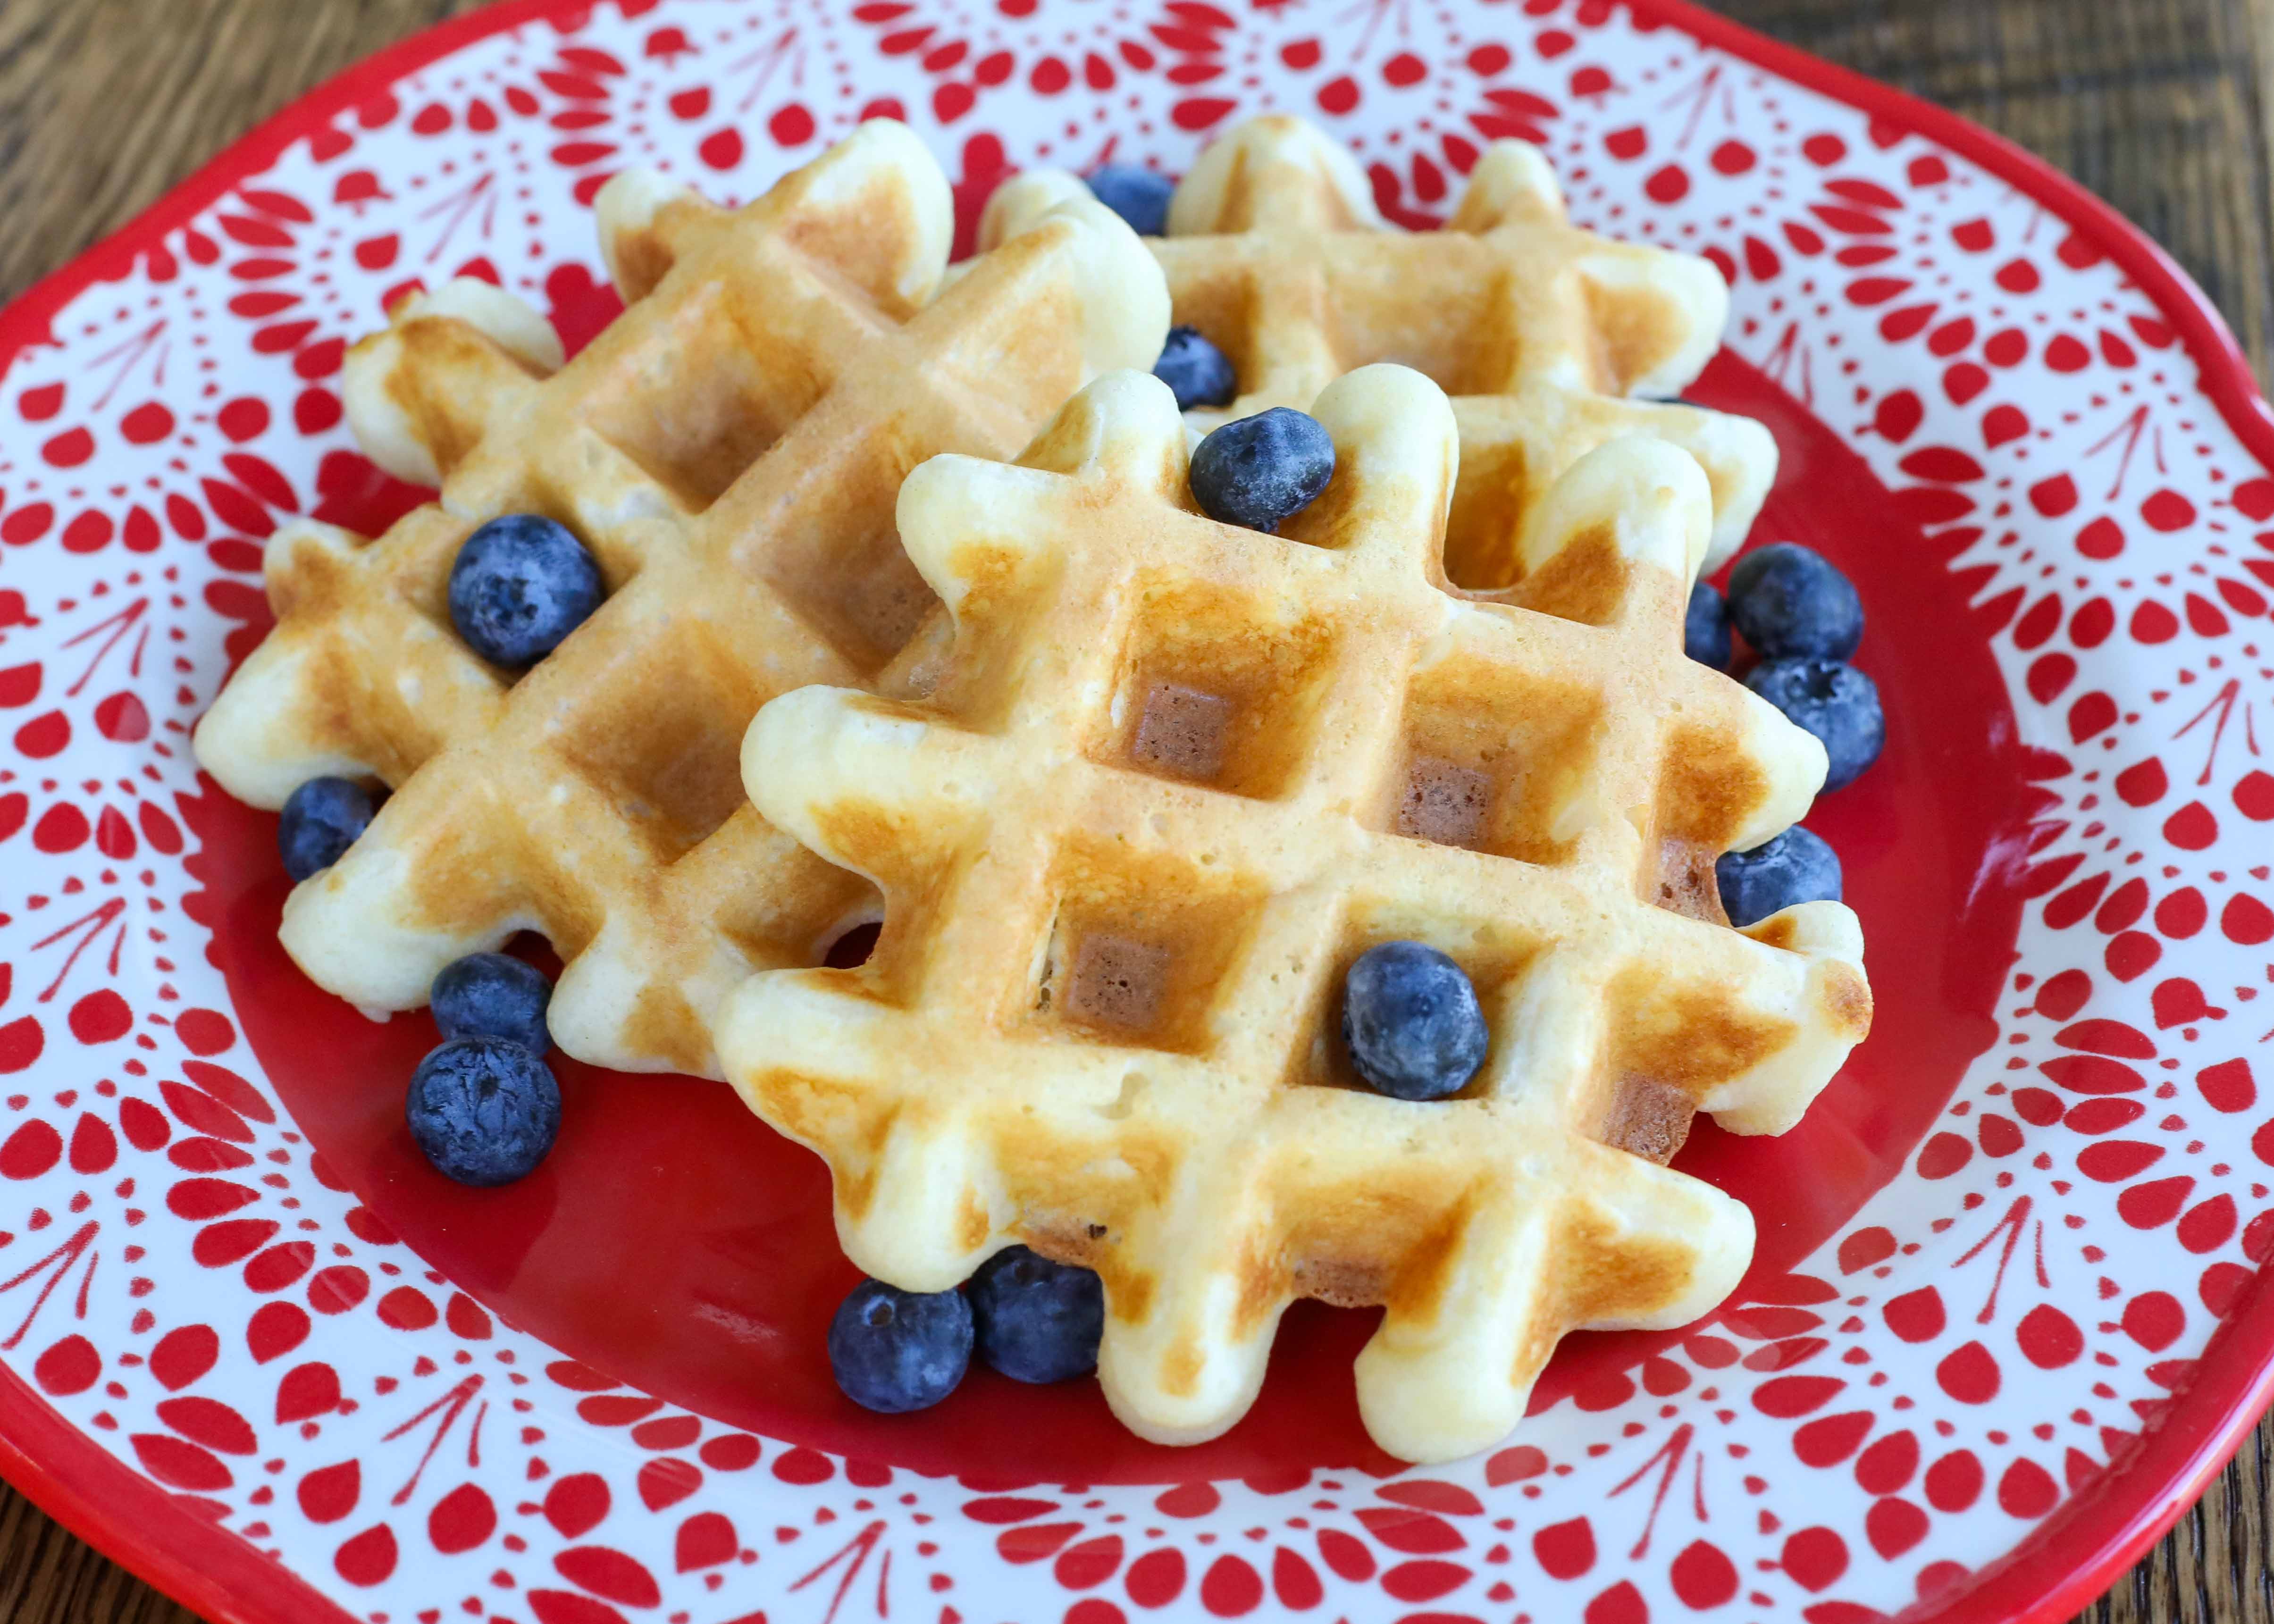 This easy buttermilk waffle recipe is fast, flexible and fun